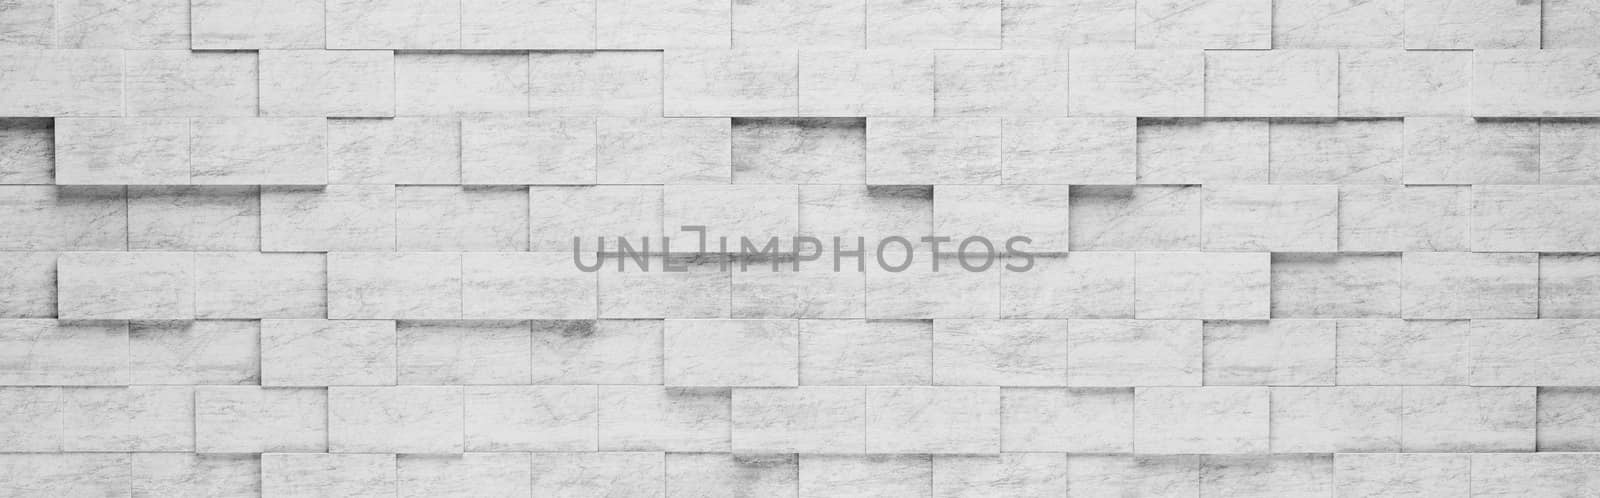 Wall of Gray Rectangles Tiles Arranged in Random Height 3D Pattern Background Illustration